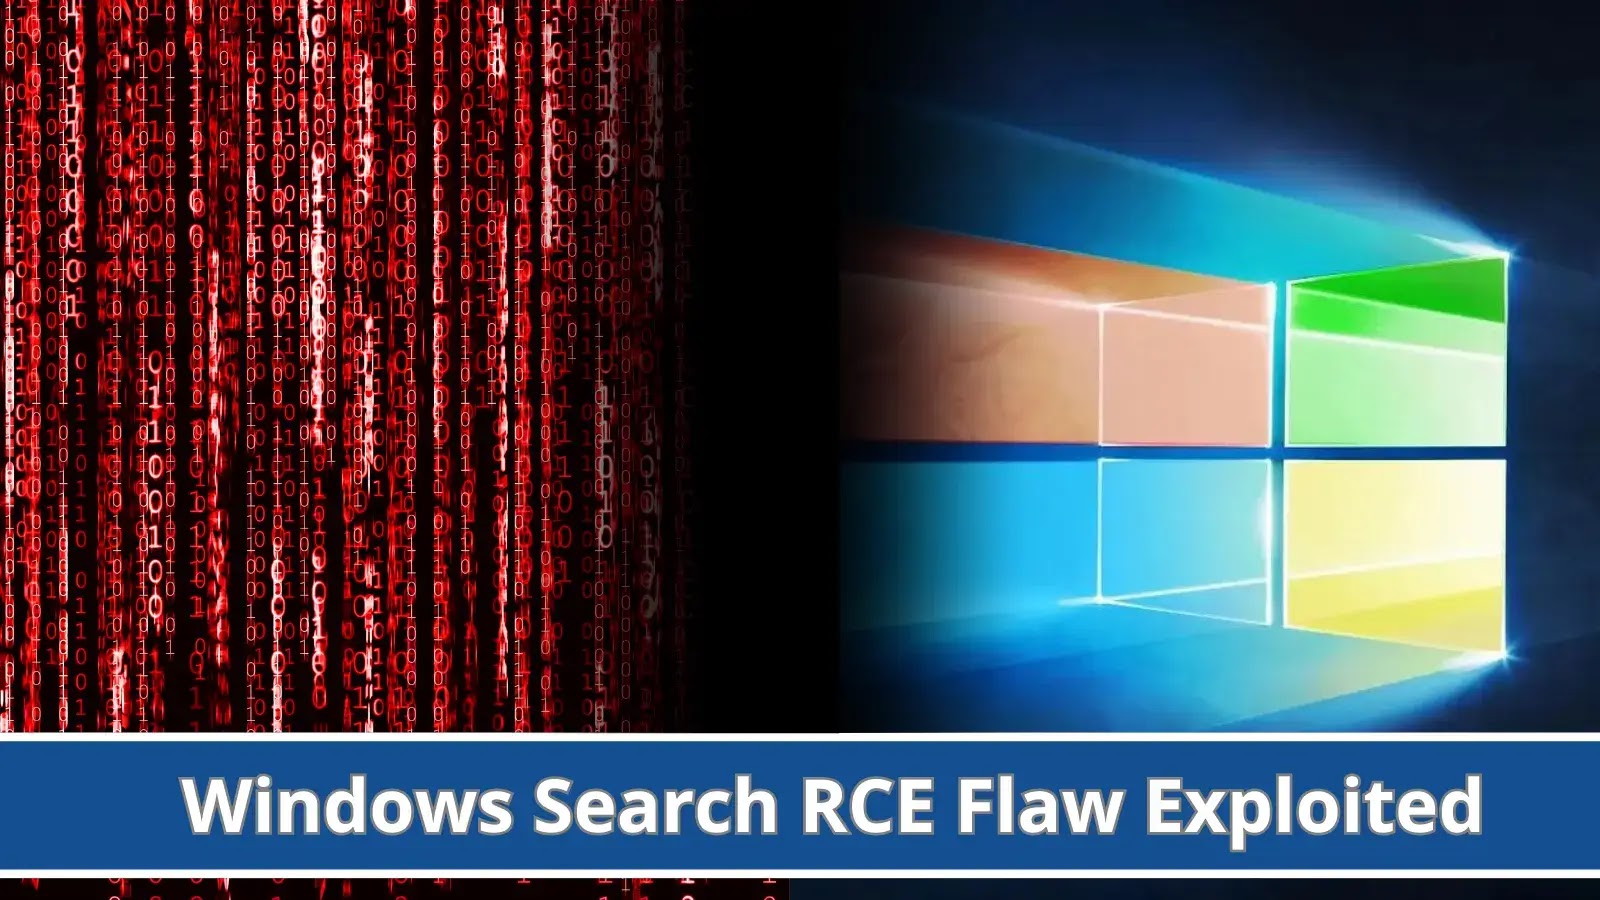 Hackers using Weaponized Office Doc to Exploit Windows RCE